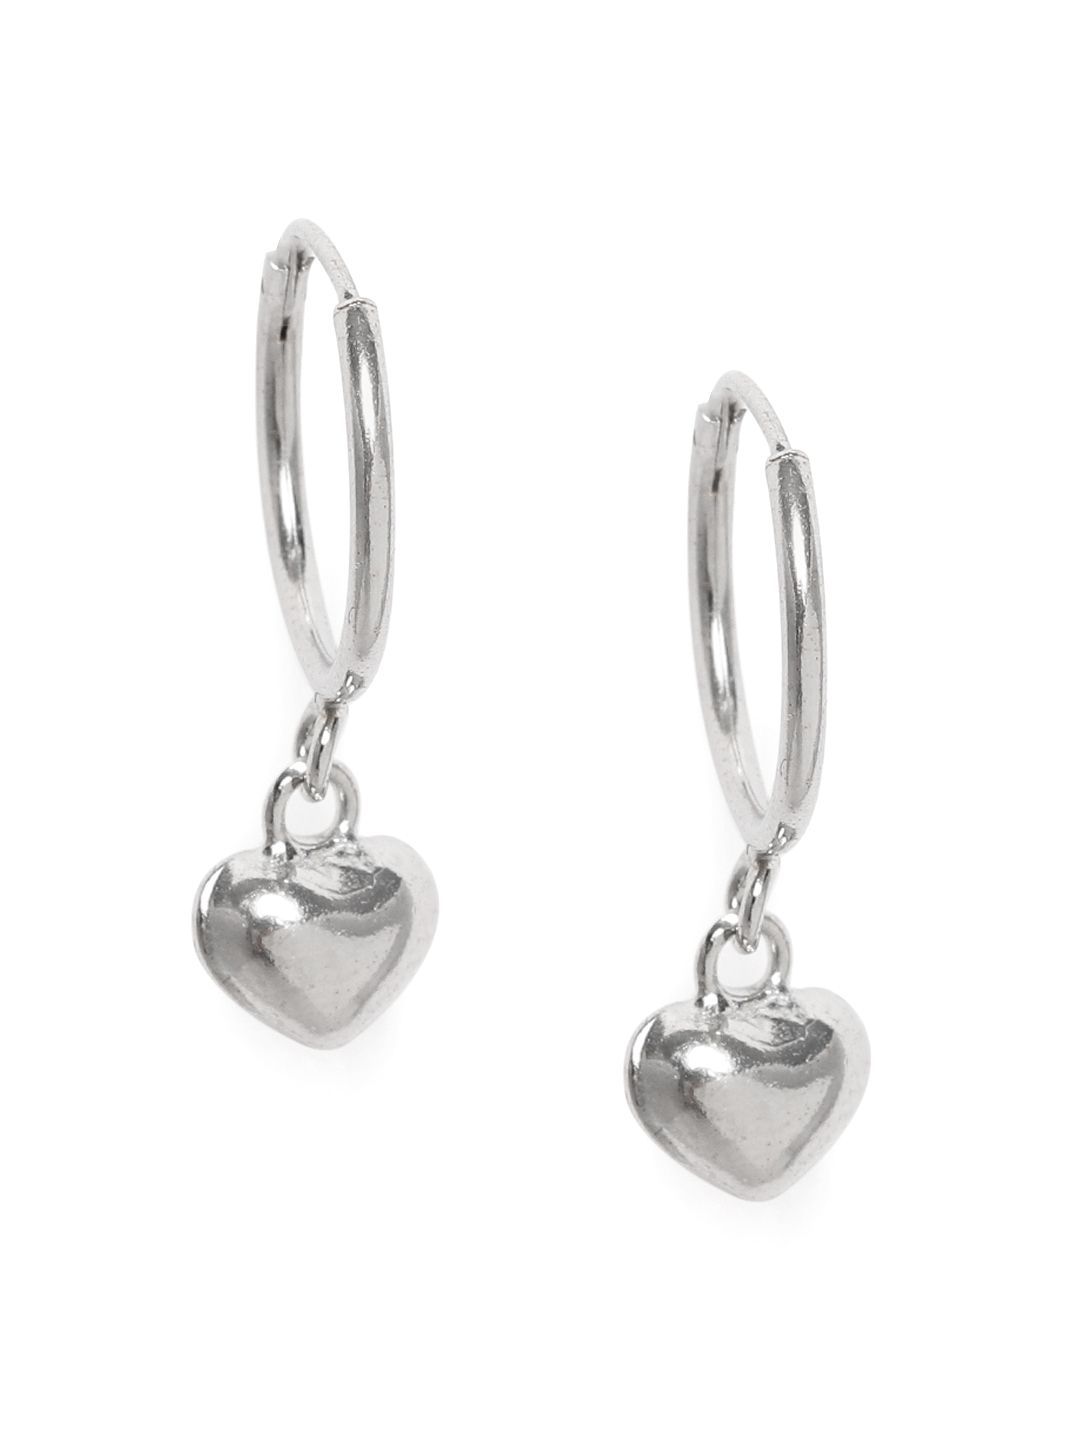 GIVA 925 Sterling Silver Rhodium-Plated Heart Shaped Hoop Earrings Price in India